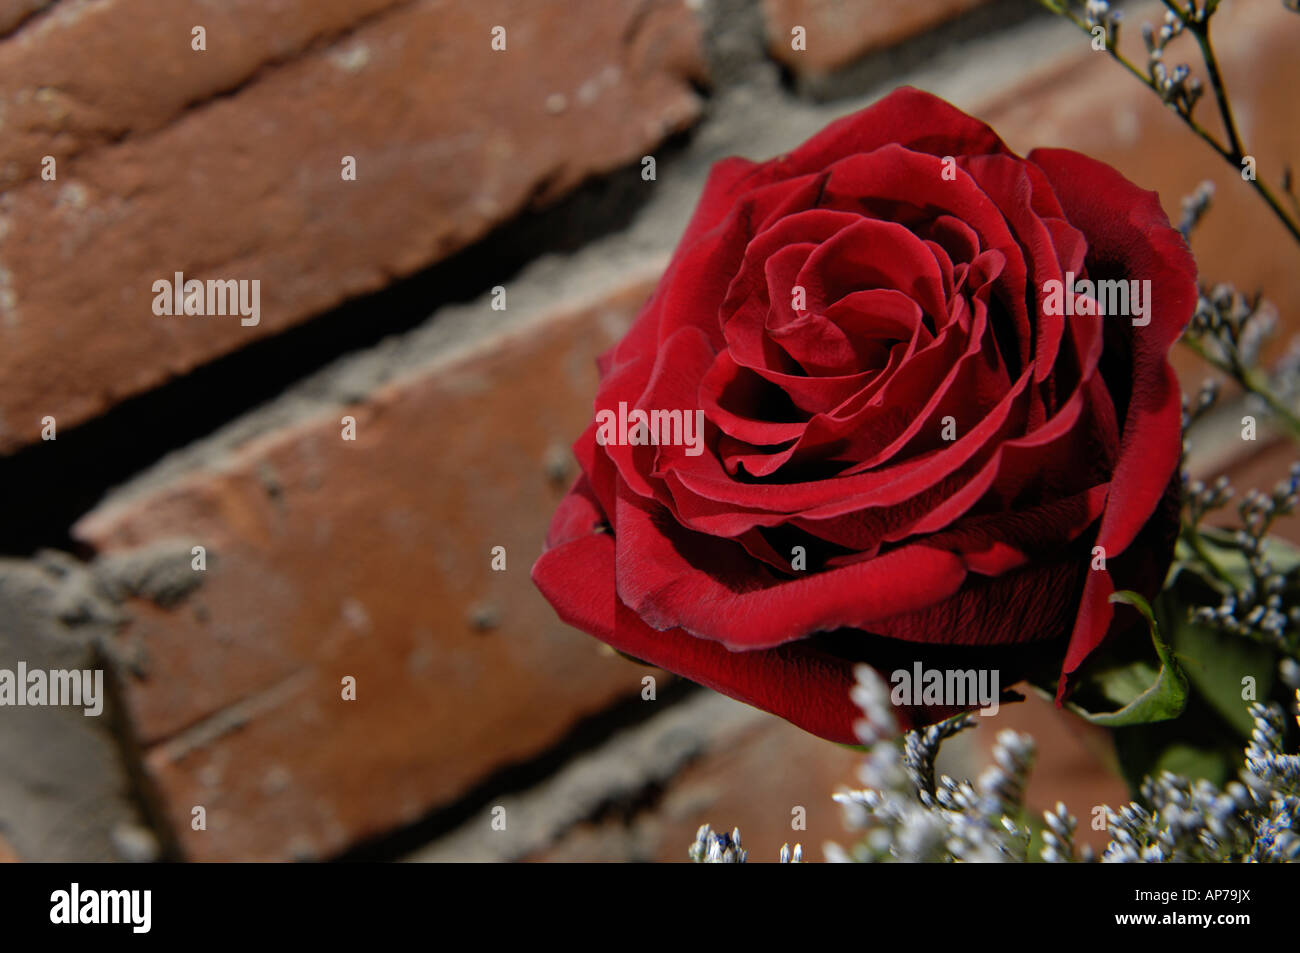 Red rose over grungy brick wall background Stock Photo